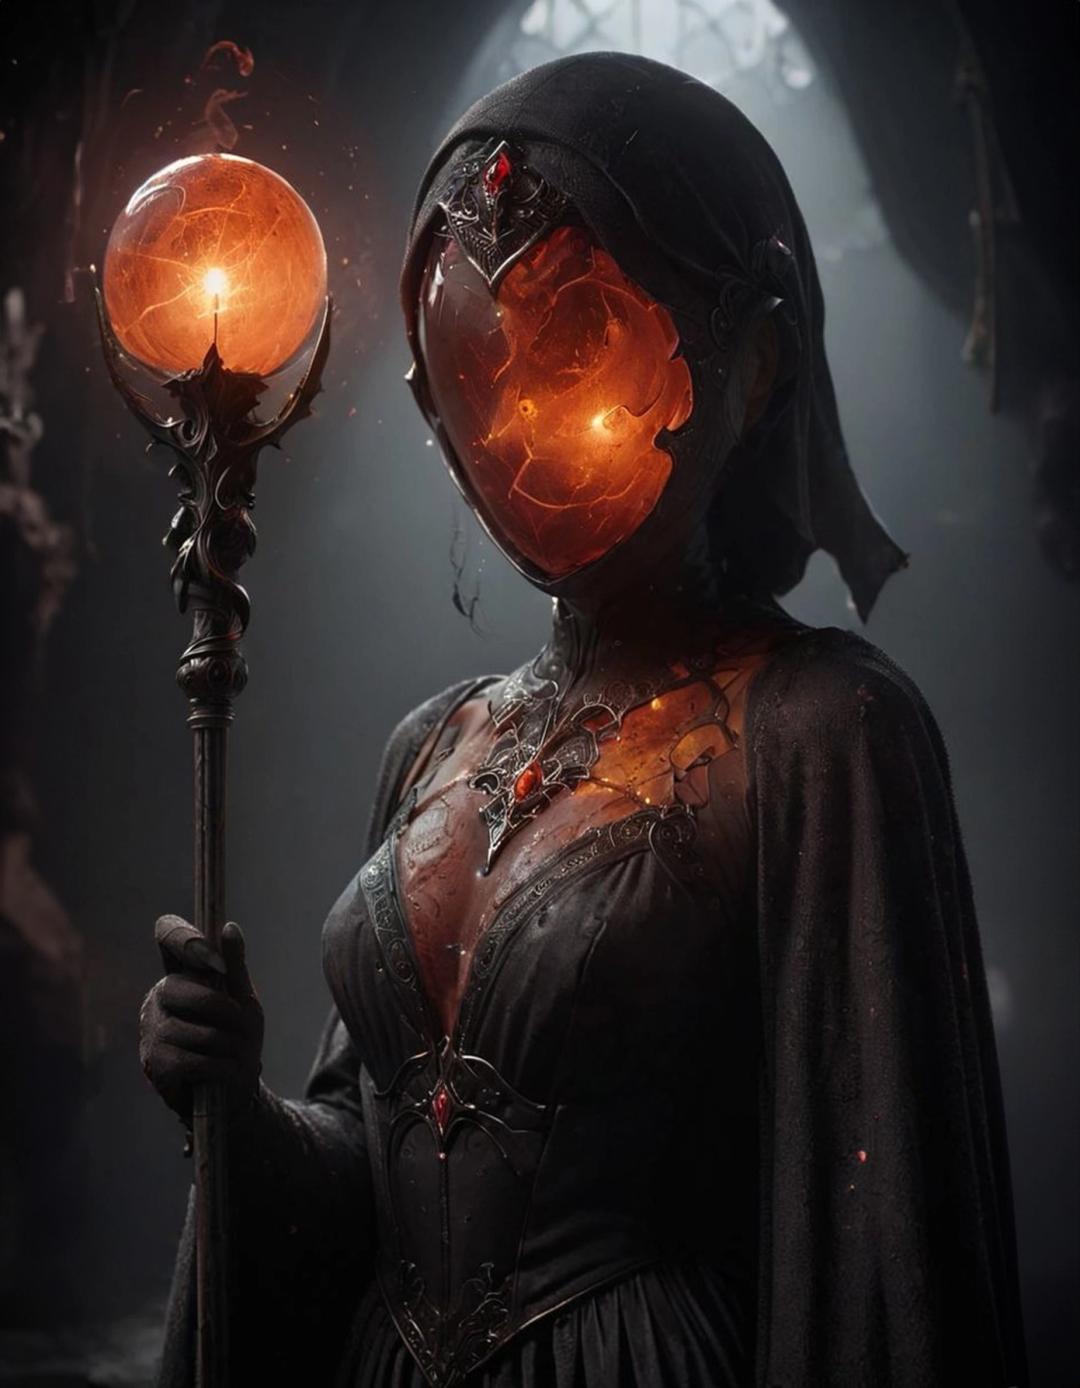 a woman in a dark costume holding a glowing orb staff in her hand and a glowing orb on mask